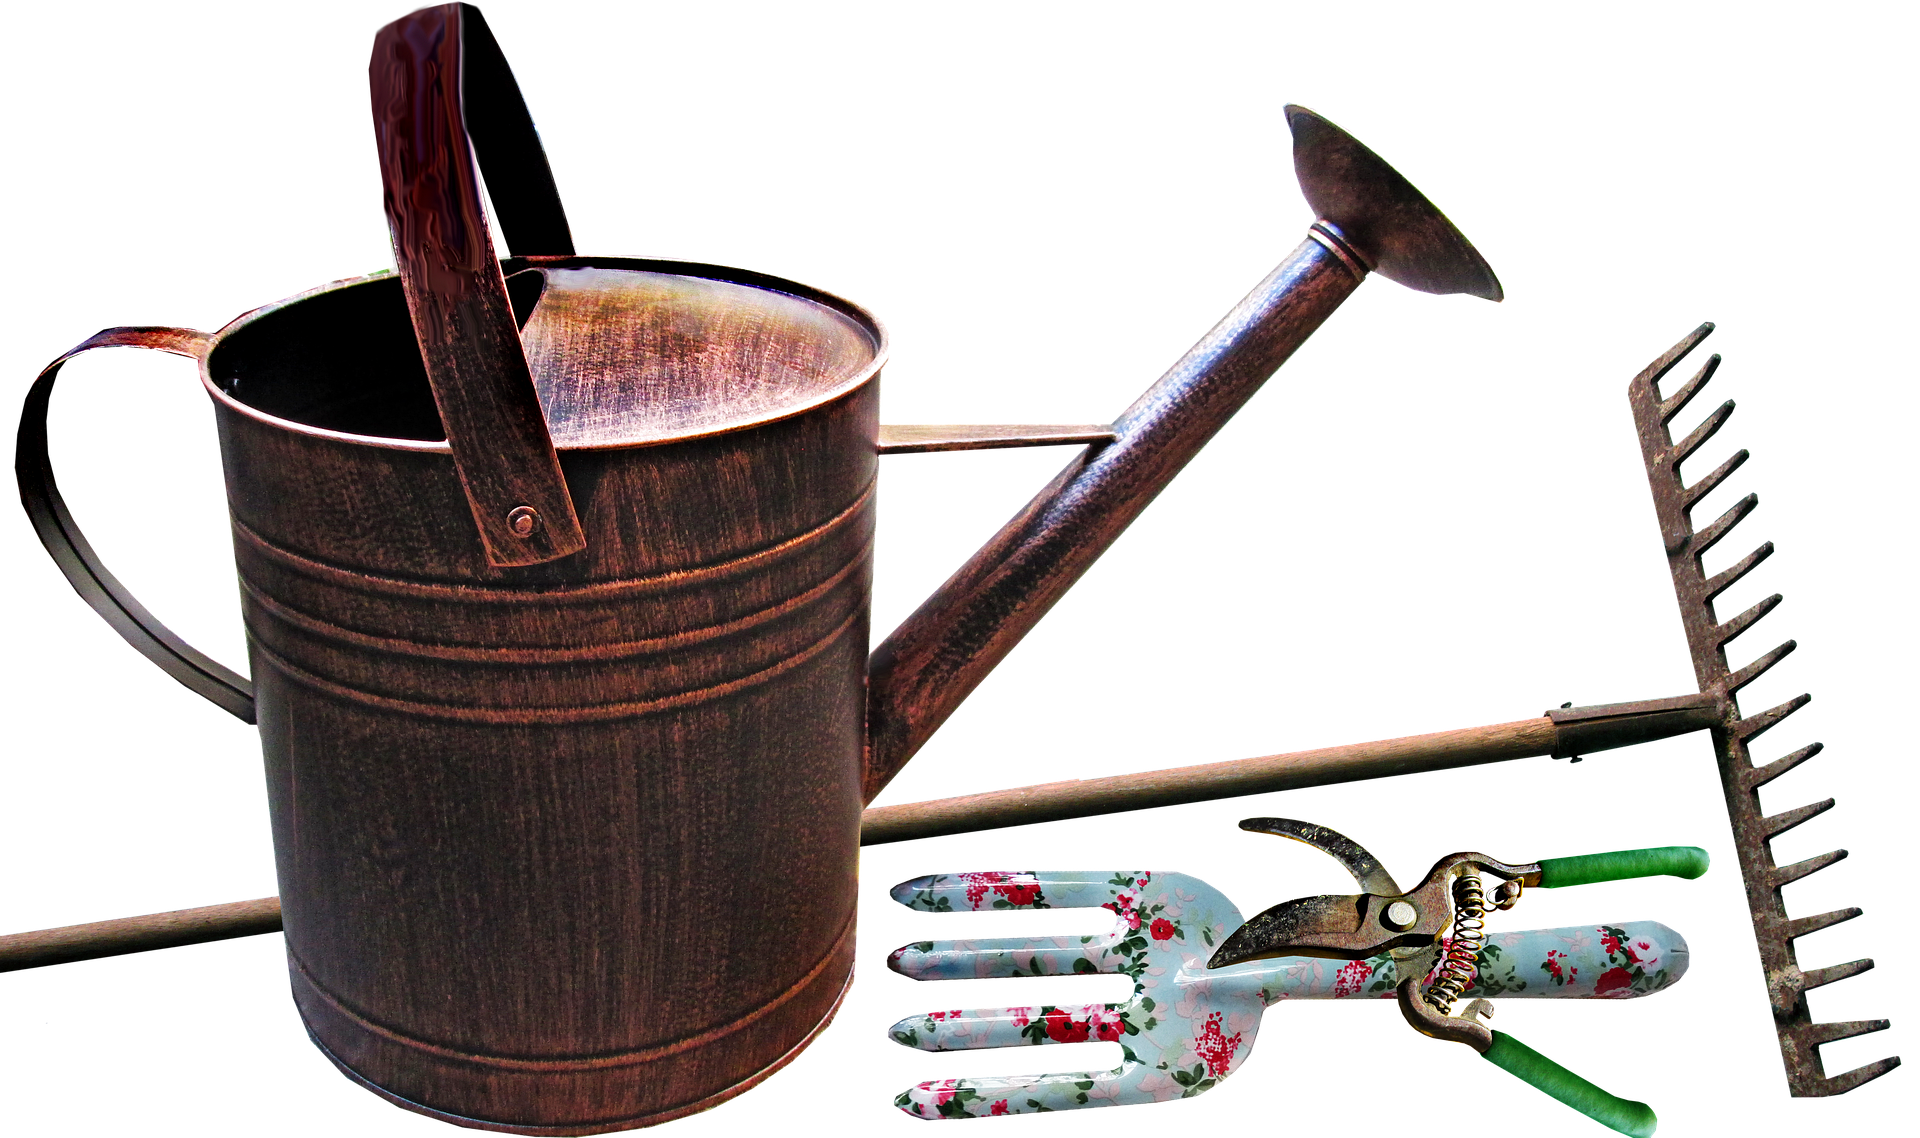 Gardening tools, Image by Beverly Buckley from Pixabay